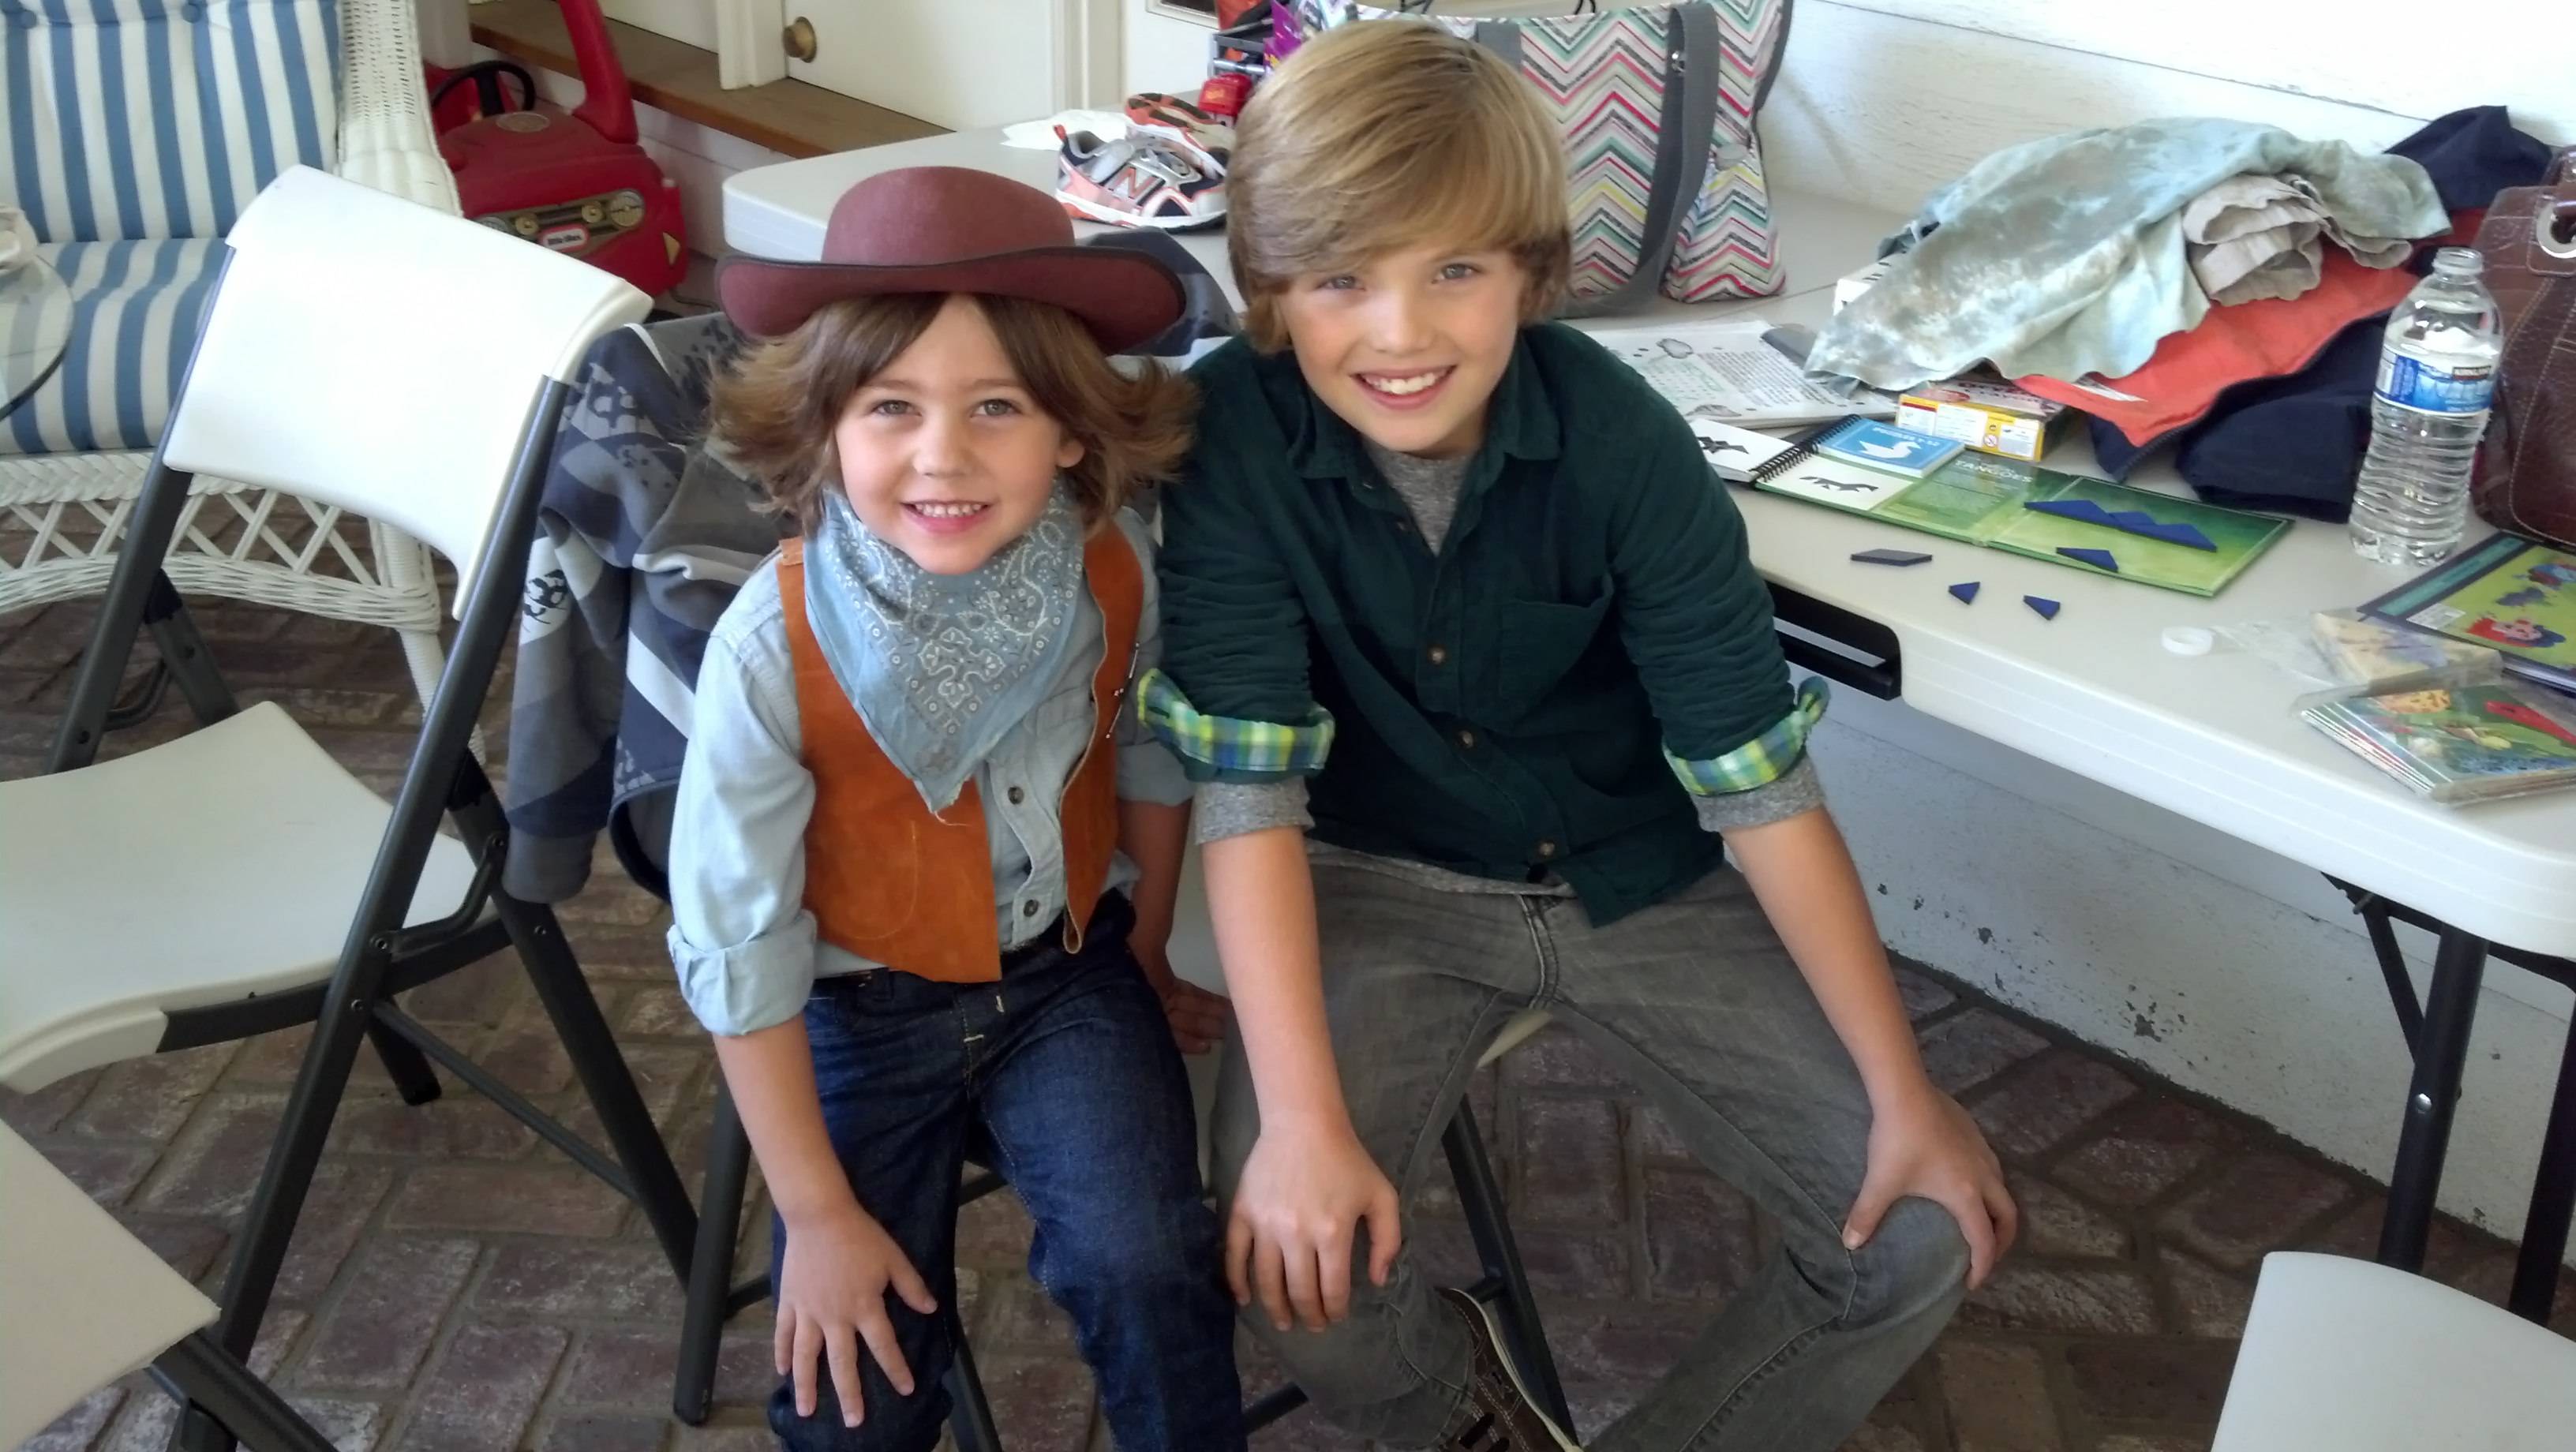 Kascee Murdock and Will Jennings on set for Cowboy Kid